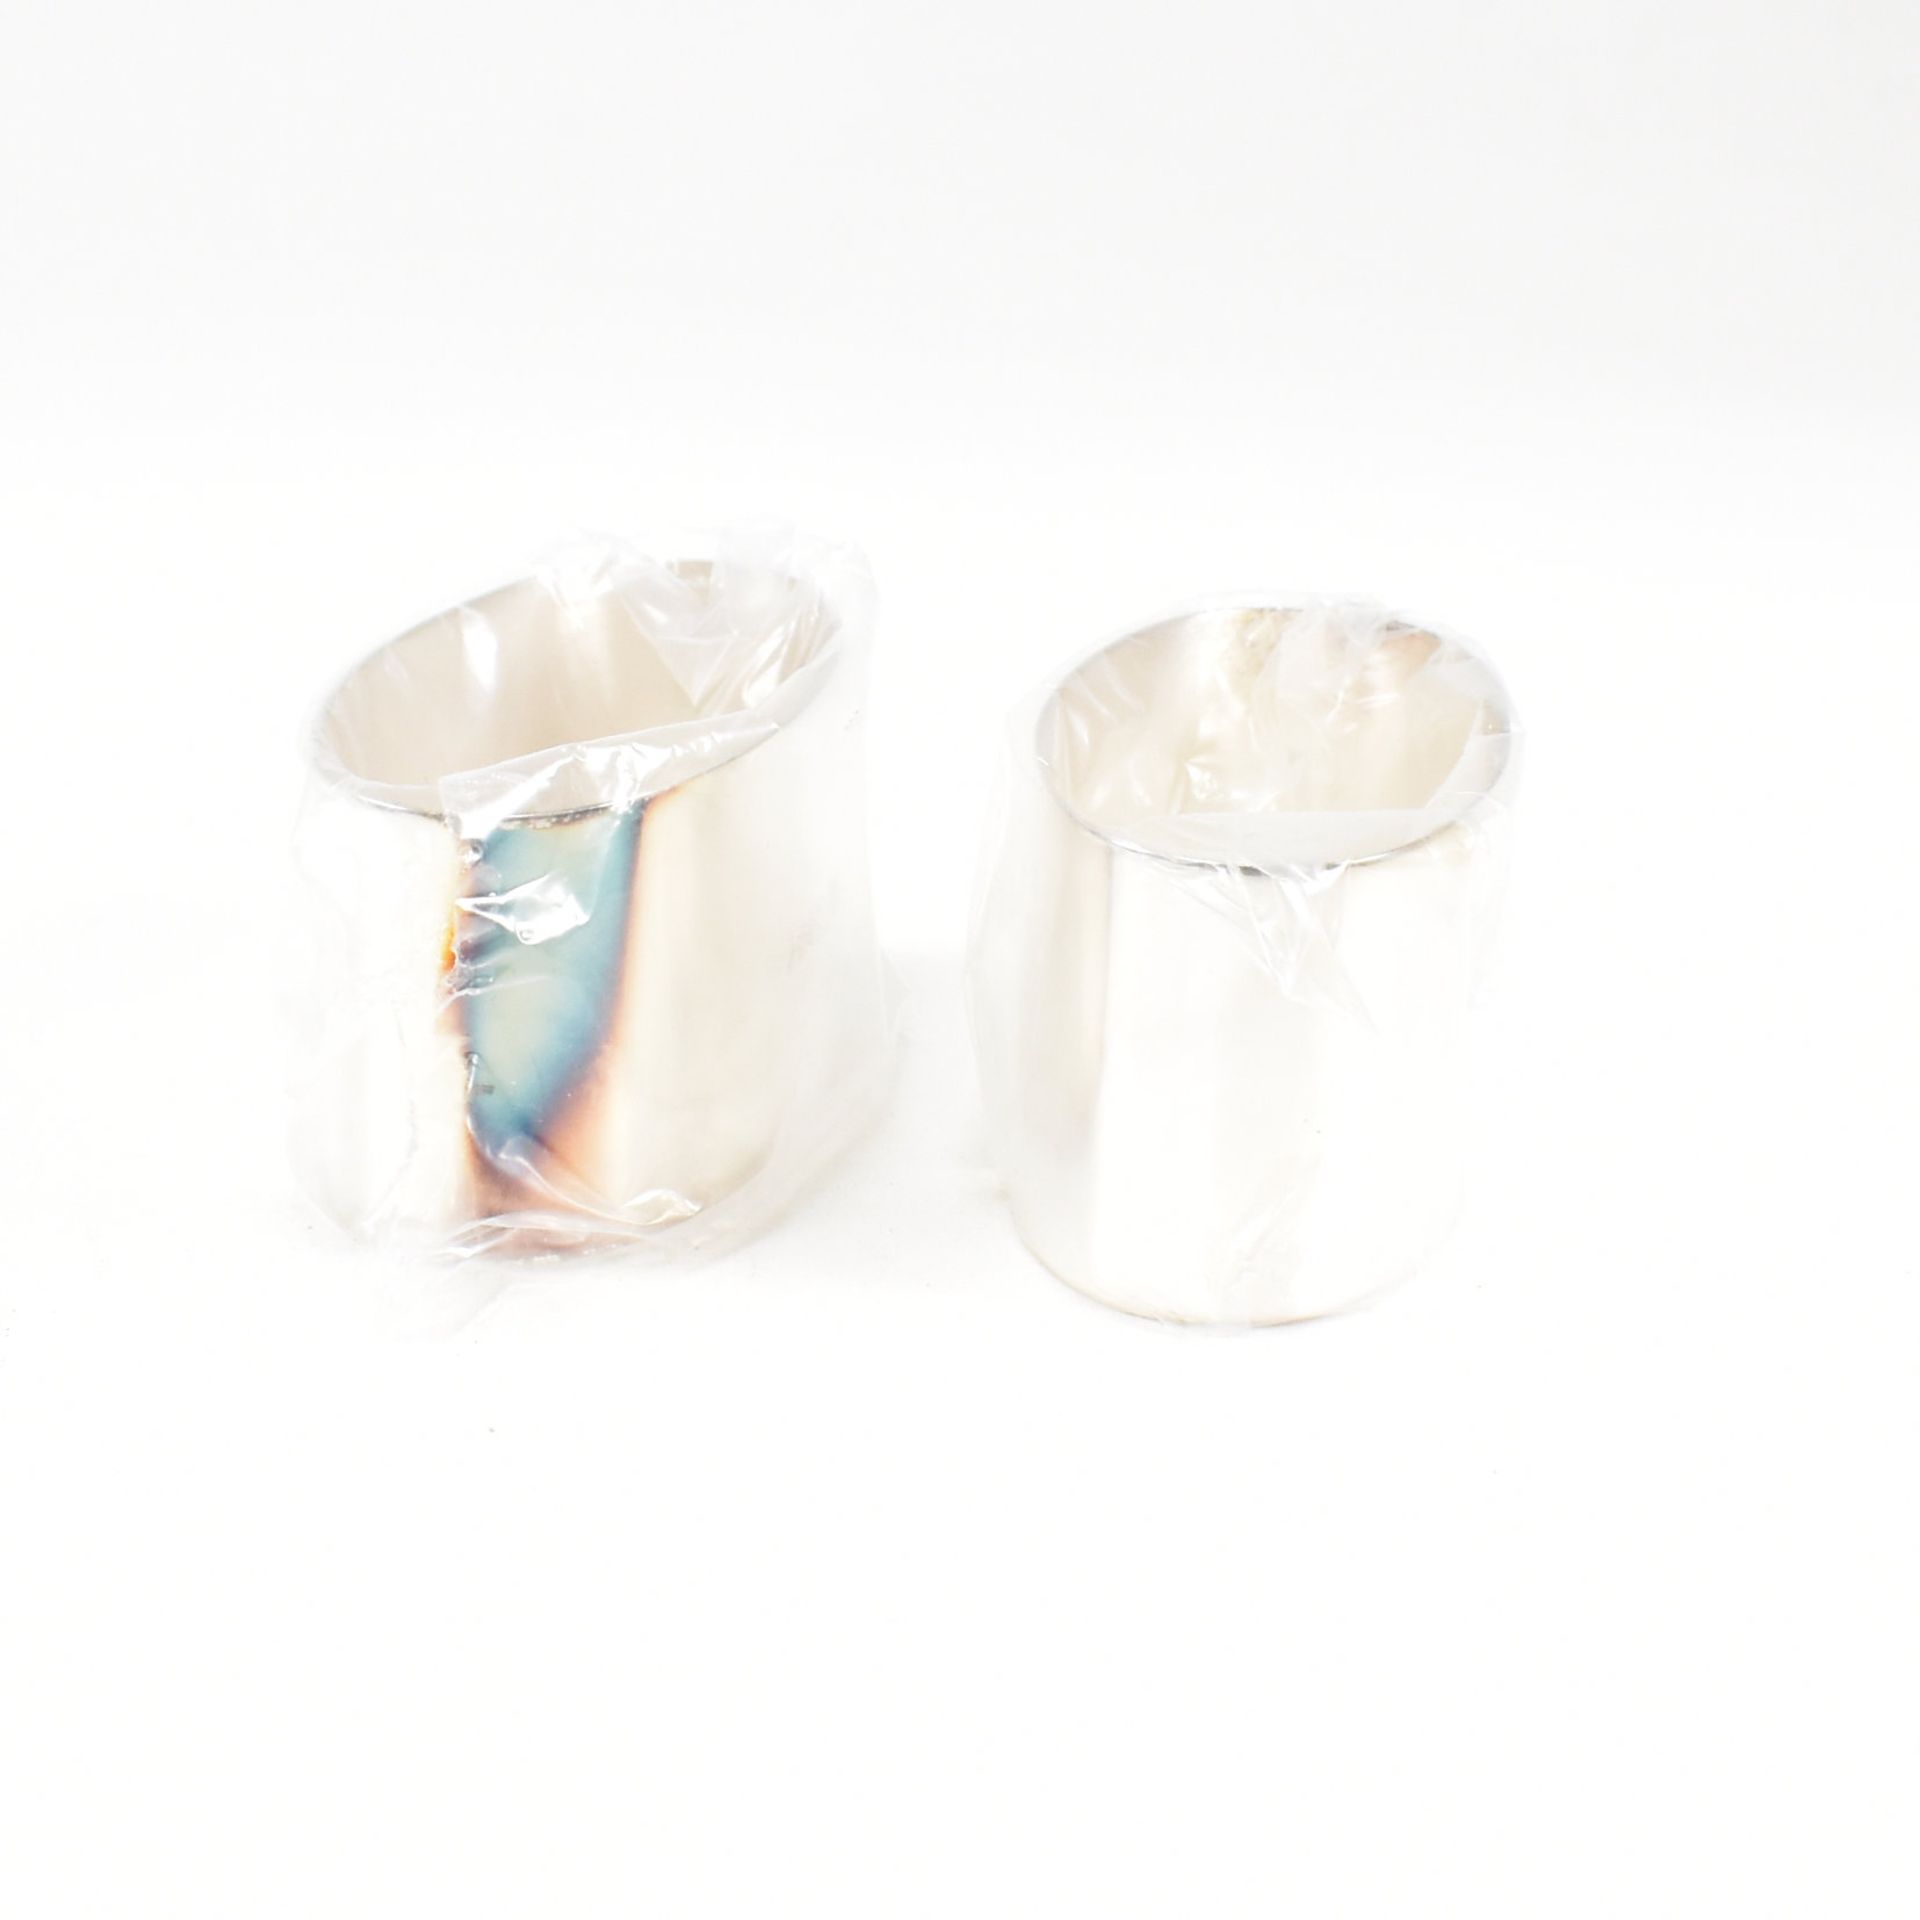 1990S CASED PAIR OF NAPKIN RINGS - Image 8 of 11